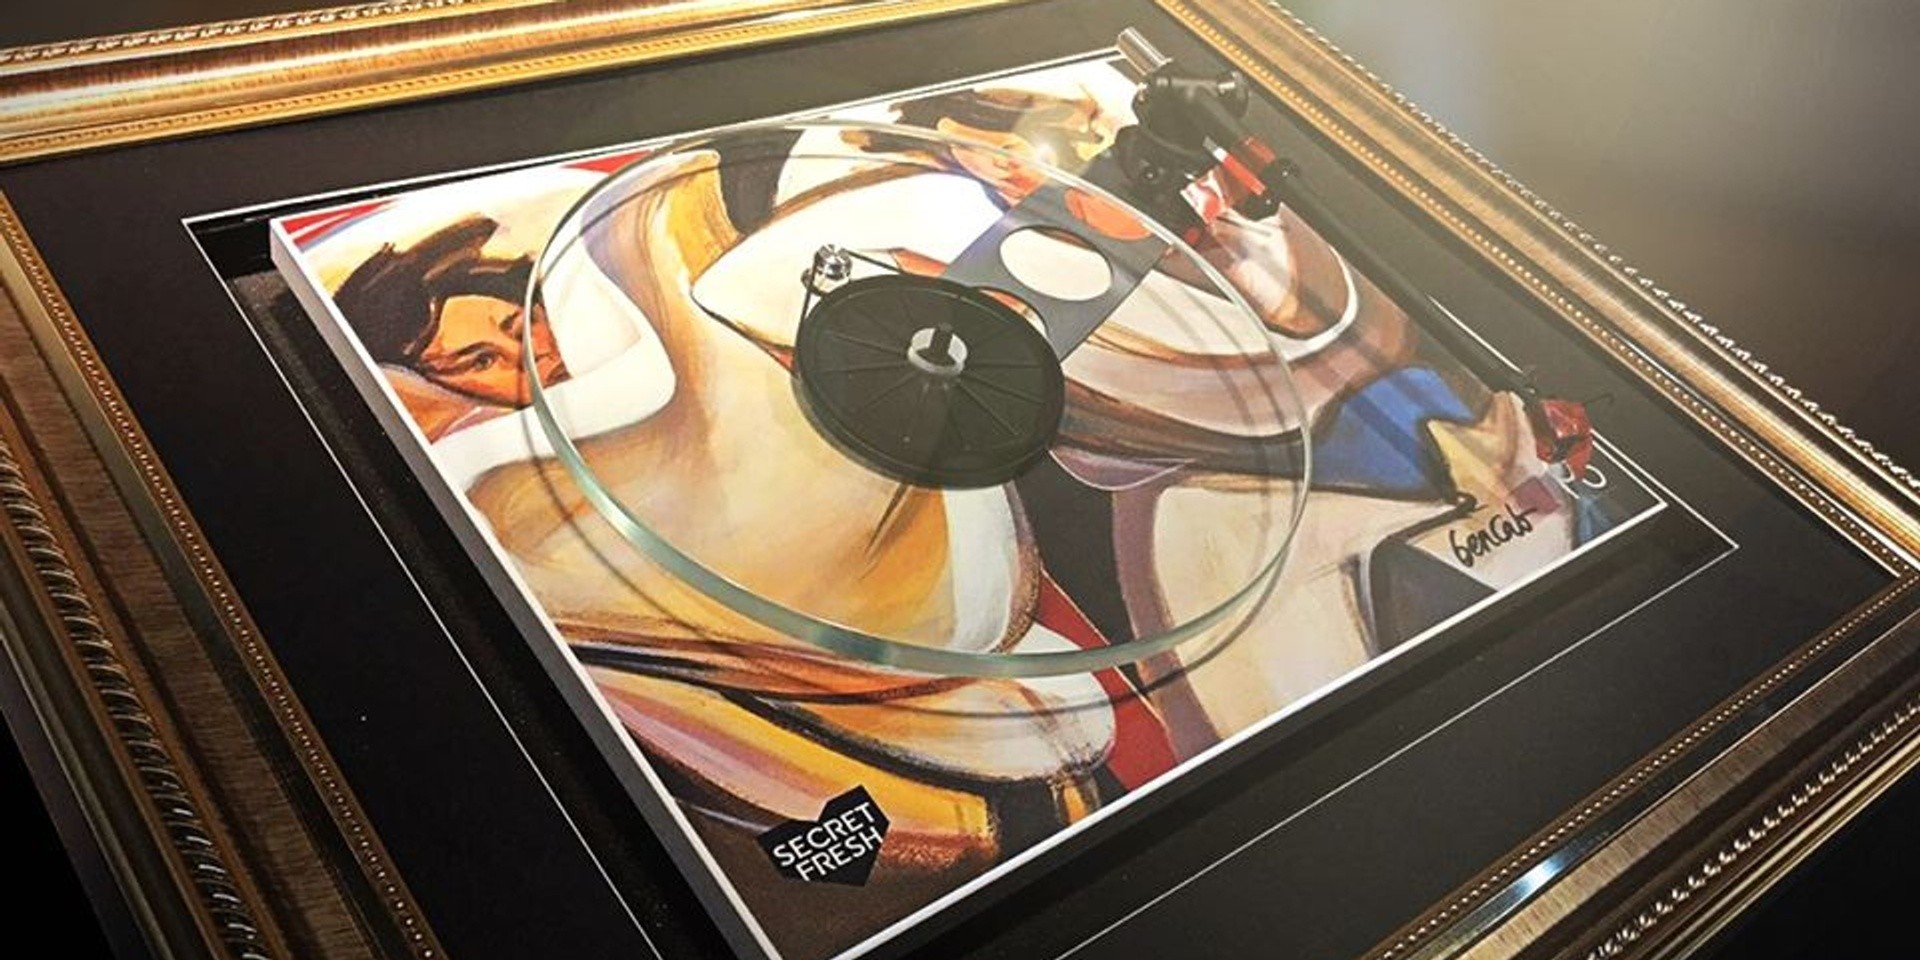 Rega collaborates with BenCab for limited edition turntable